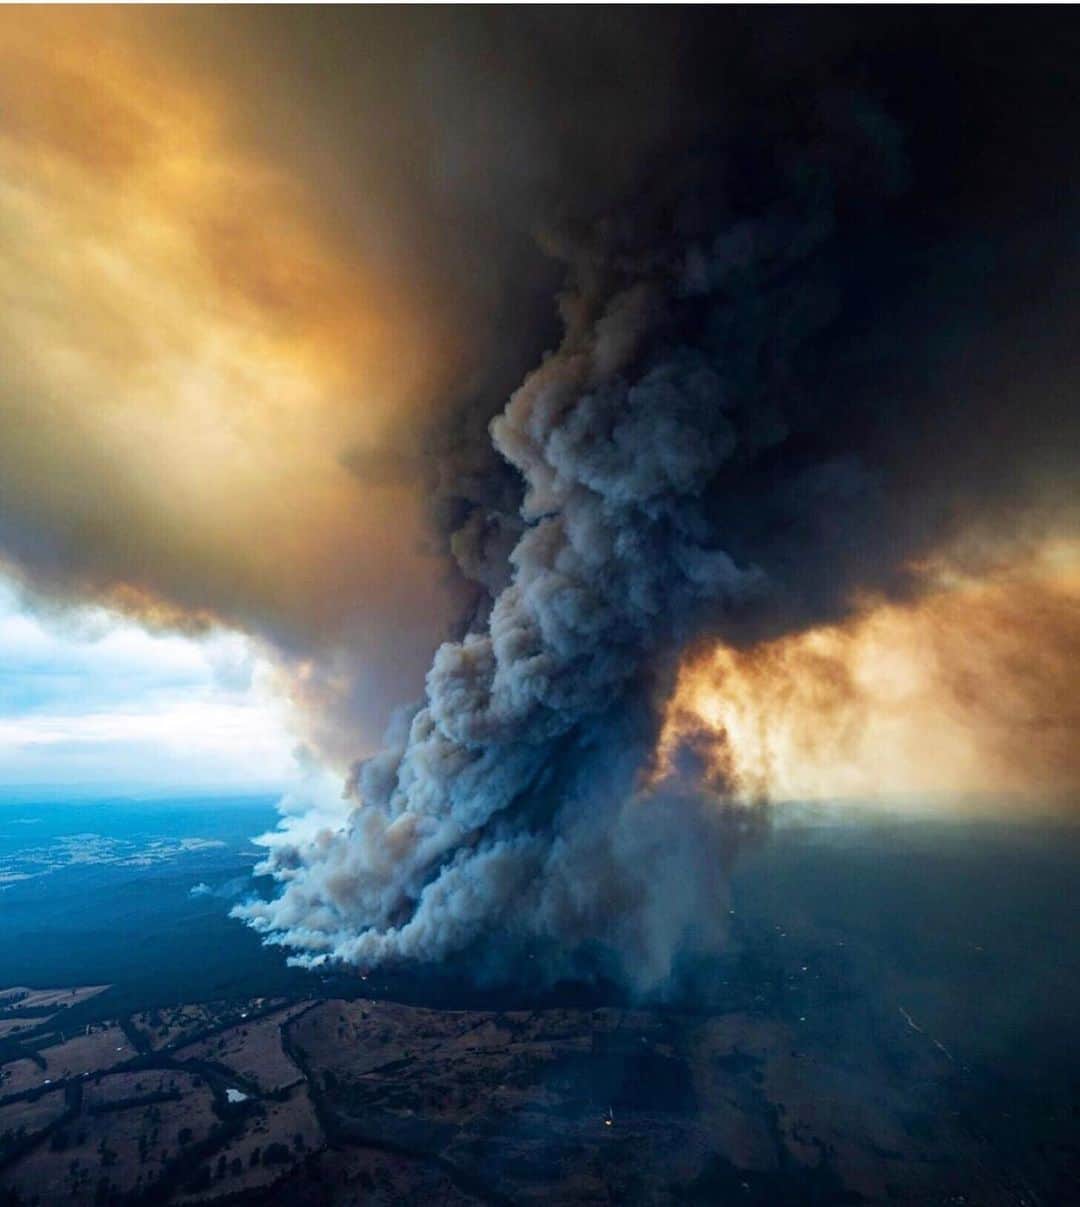 ジェシカ・スタインさんのインスタグラム写真 - (ジェシカ・スタインInstagram)「Australia is BURNING. We cannot look away while so many homes, lives and futures are reduced to ash. We must make the change we want to see for our world, and right now millions can’t see through the smoke.  Our country has been burning for months. 20 lives have been lost, with dozens of people missing. An estimated 500 million animals have perished. Over 12 million acres of land has burnt. These fires will continue to burn for weeks, months to come. Please help in any way that you can wether it be donations of money, resources, time, blood or awareness and advocacy.  Here are some organisations where you can donate: - NSW Rural Fire Service @nswrfs https://www.rfs.nsw.gov.au/volunteer/support-your-local-brigade - Victorian Country Fire Association (CFA) @cfavic https://www.cfa.vic.gov.au/about/supporting-cfa#donate-cfa - Rural Fire Brigade Association Queensland (RFBAQ) https://www.rfbaq.org/donate-to-rfbaq - South Australia Country Fire Service (CFS) https://cfsfoundation.org.au/donate - WIRES - NSW Wildlife Information, Rescue and Education Service https://www.wires.org.au/donate/now - Fire Relief Fund for First Nation Communities https://au.gofundme.com/f/fire-relief-fund-for-first-nations-communities - Direct donation to the families of 3 NSW fire fighters who lost their lives http://www.rfs.nsw.gov.au/news-and-media/general-news/featured/support-for-firefighter-families  Just one incredible human @celestebarber has made waves from ripples with her fundraiser for the RFS, the link is in my Bio where anyone can easily internationally donate.  If anyone displaced needs somewhere to stay, I have a spare room available on the Central Coast.  I’m sorry I haven’t been sharing for months as I have been struggling with my health, and found that being online wasn’t the best place for me. But in times of need, social media can unite and empower us all. The ability to empathise with and support those facing catastrophe on the other side of the world should not be taken for granted. We all breathe the same air and wether it be today or tomorrow; climate change will effect us all.  My apologies for not being able to locate image credits, please email me.」1月5日 8時58分 - tuulavintage